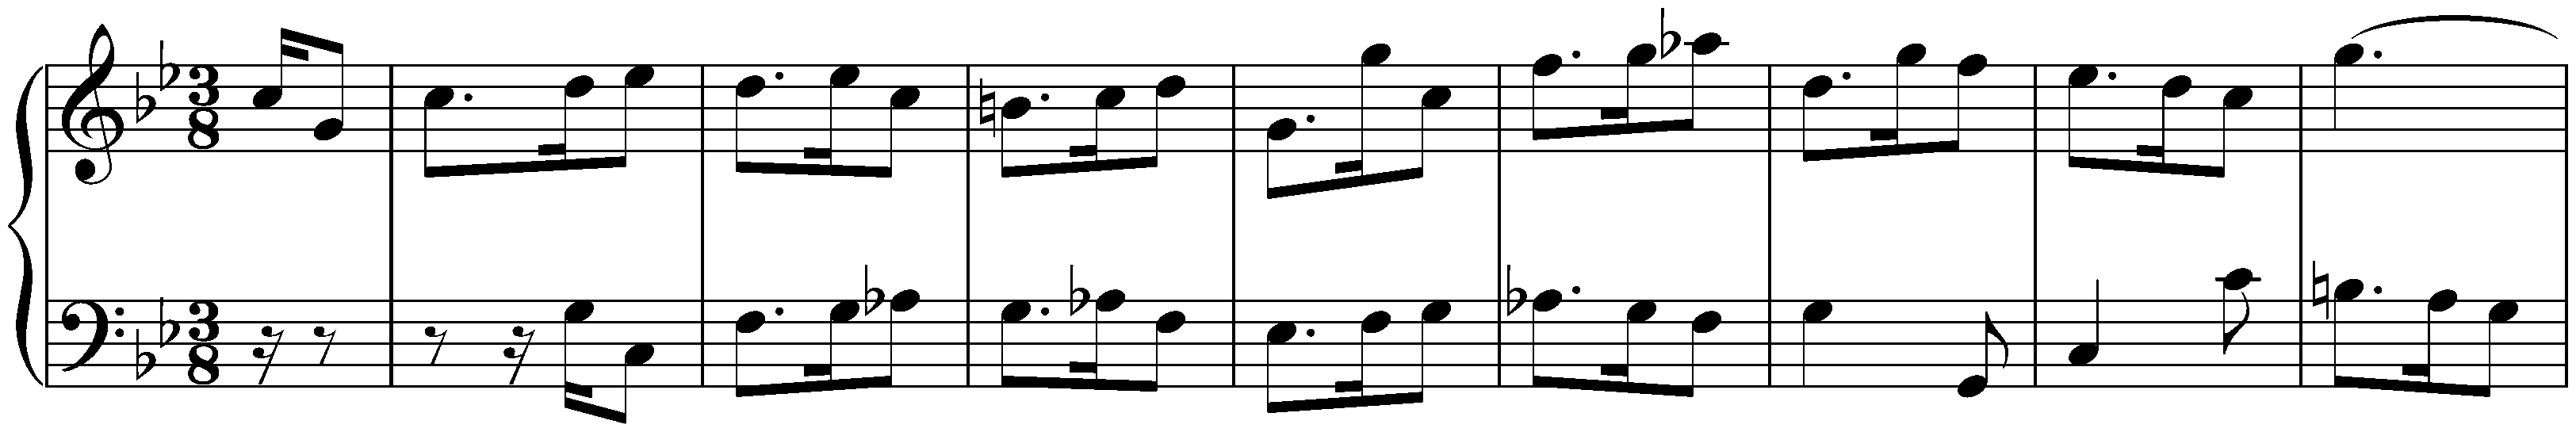 French Suite no. 2 in C minor, BWV 813; 6. Gigue